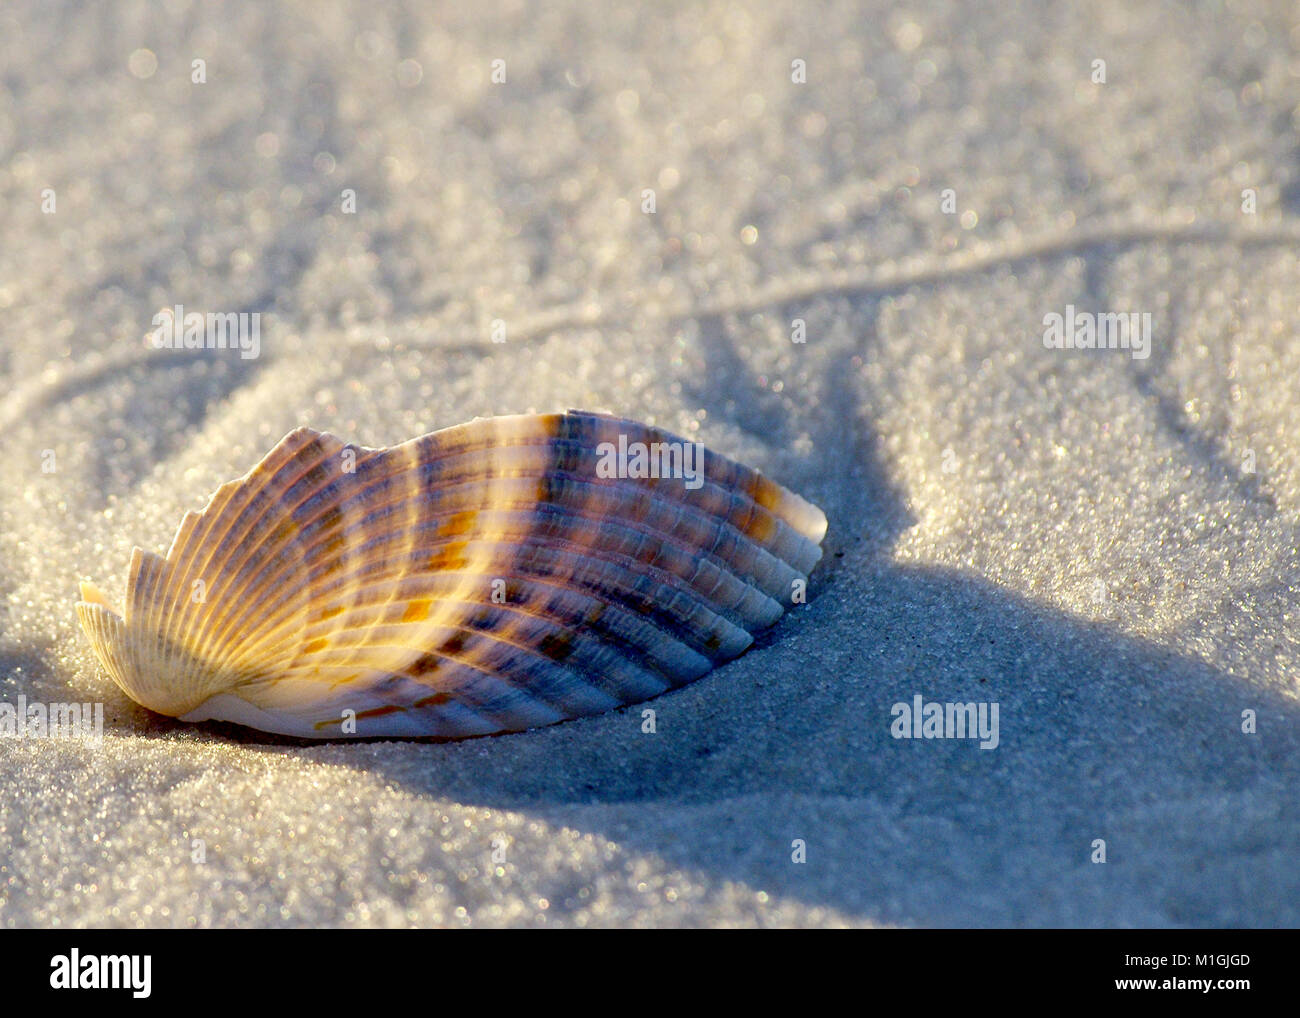 Seashell on beach Banque D'Images